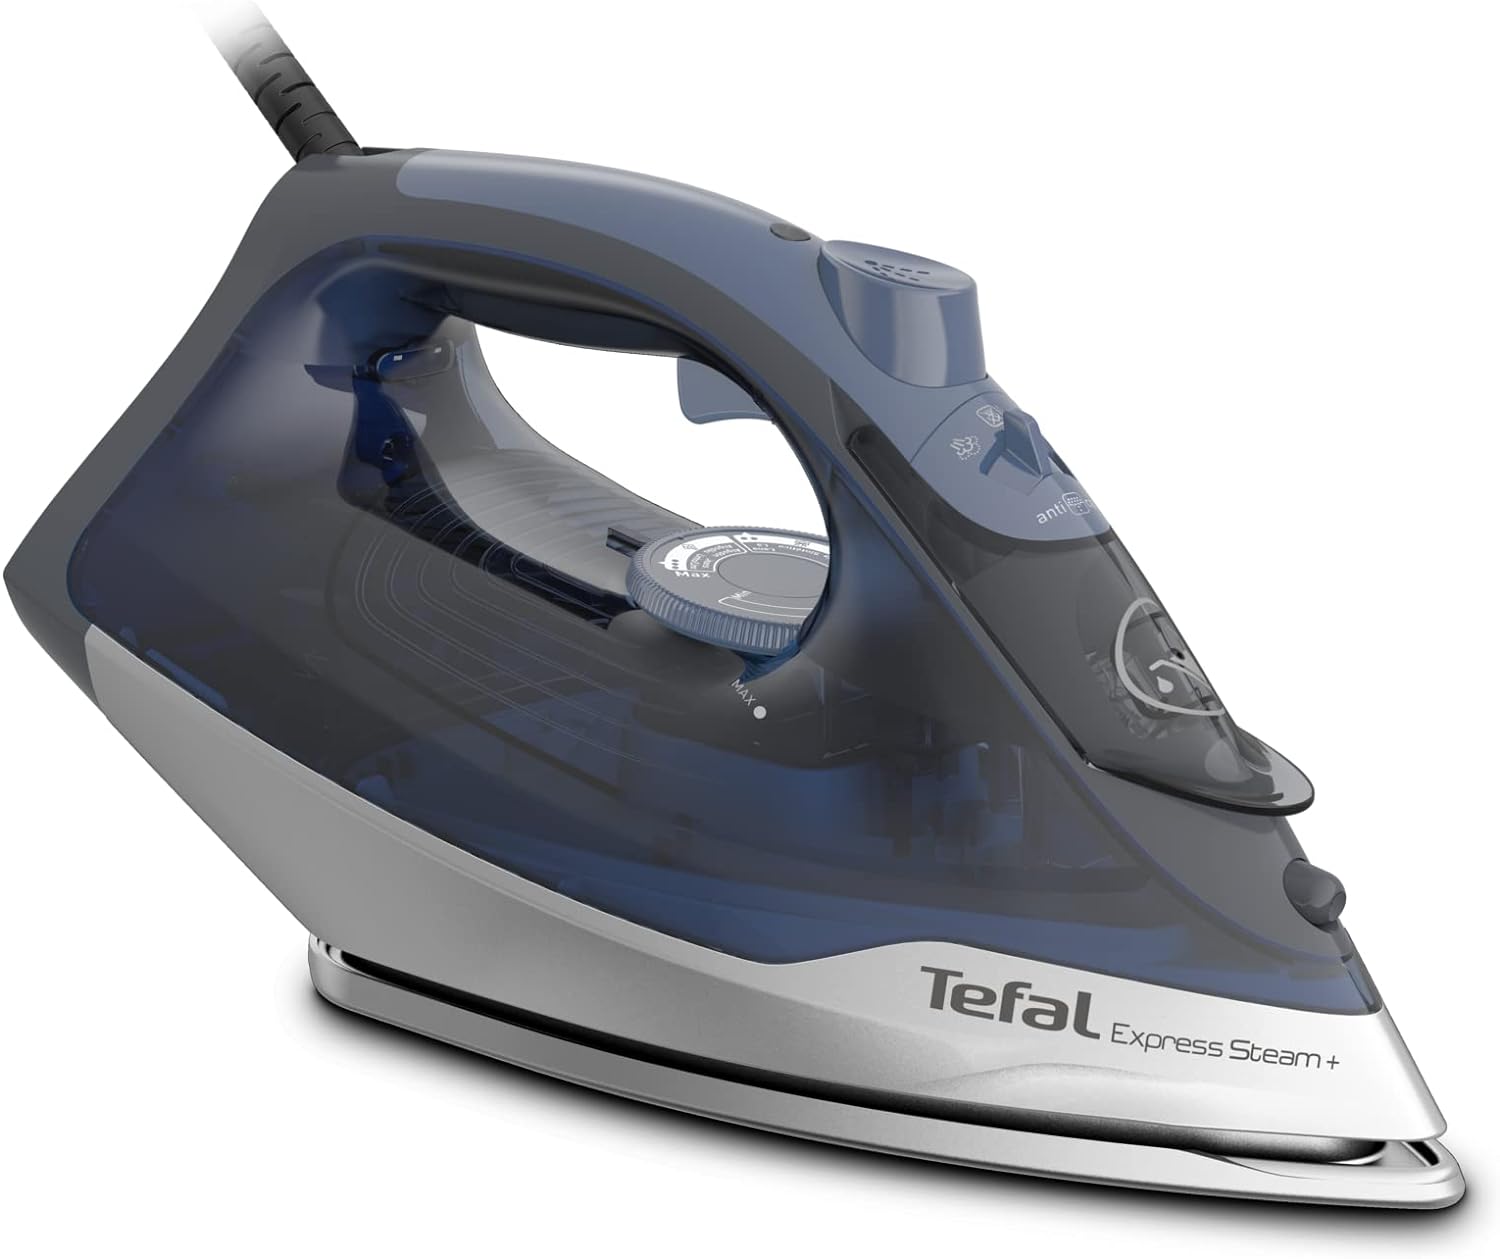 Tefal Steam Iron, Express Steam, 2600 watts, Blue and Grey, FV2882, 0.27L